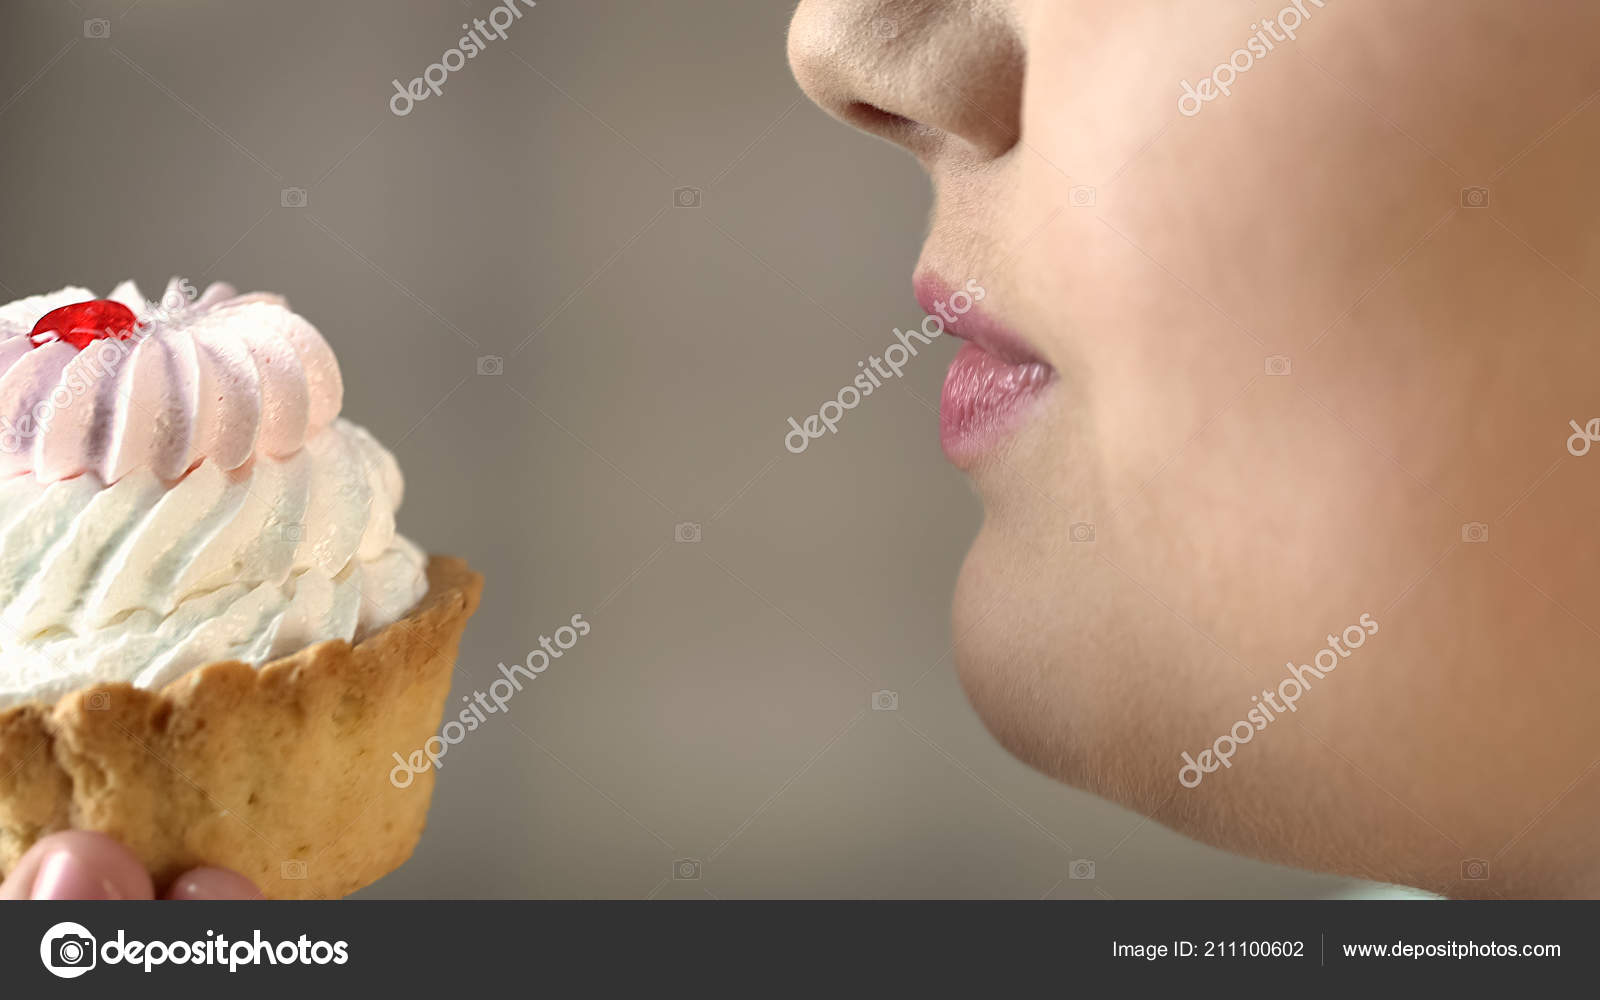 Fat Woman Looking Cake Temptation Overweight Unhealthy Food Diabetes Royalty Free Photo Stock Image By C Motortion 211100602